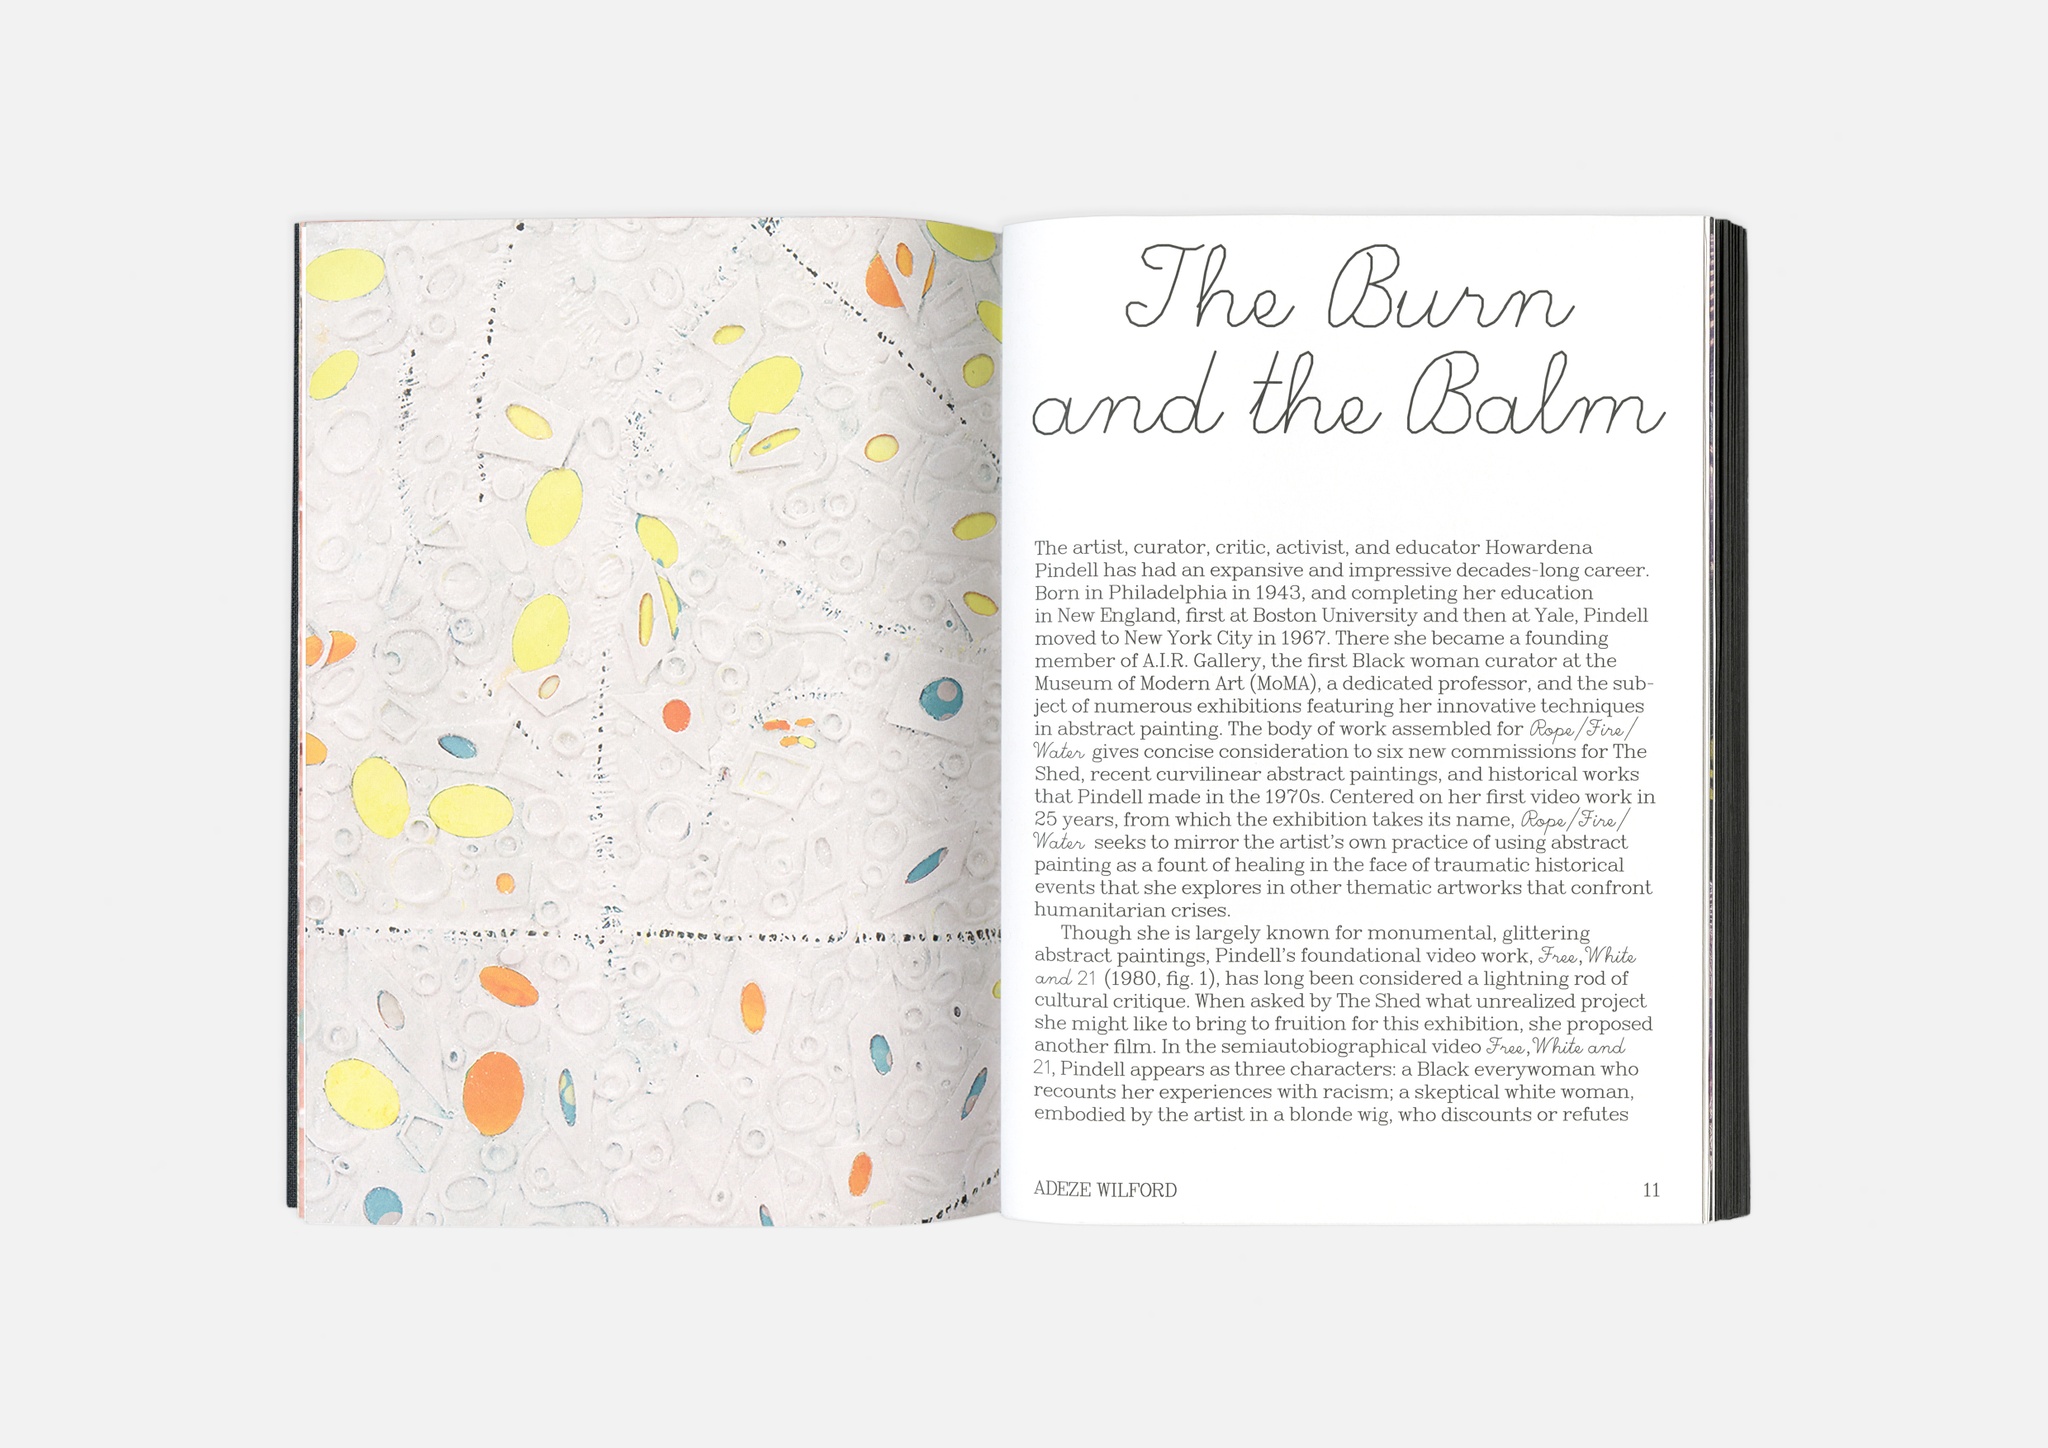 A spread of the catalogue "Howardena Pindell: Rope/Fire/Water". On the left is a full-bleed detail image of a white abstract painting with multicolored dots. On the right, an essay title sits in script at the top of the page with the author's name, Adeze Wilford, at the bottom.